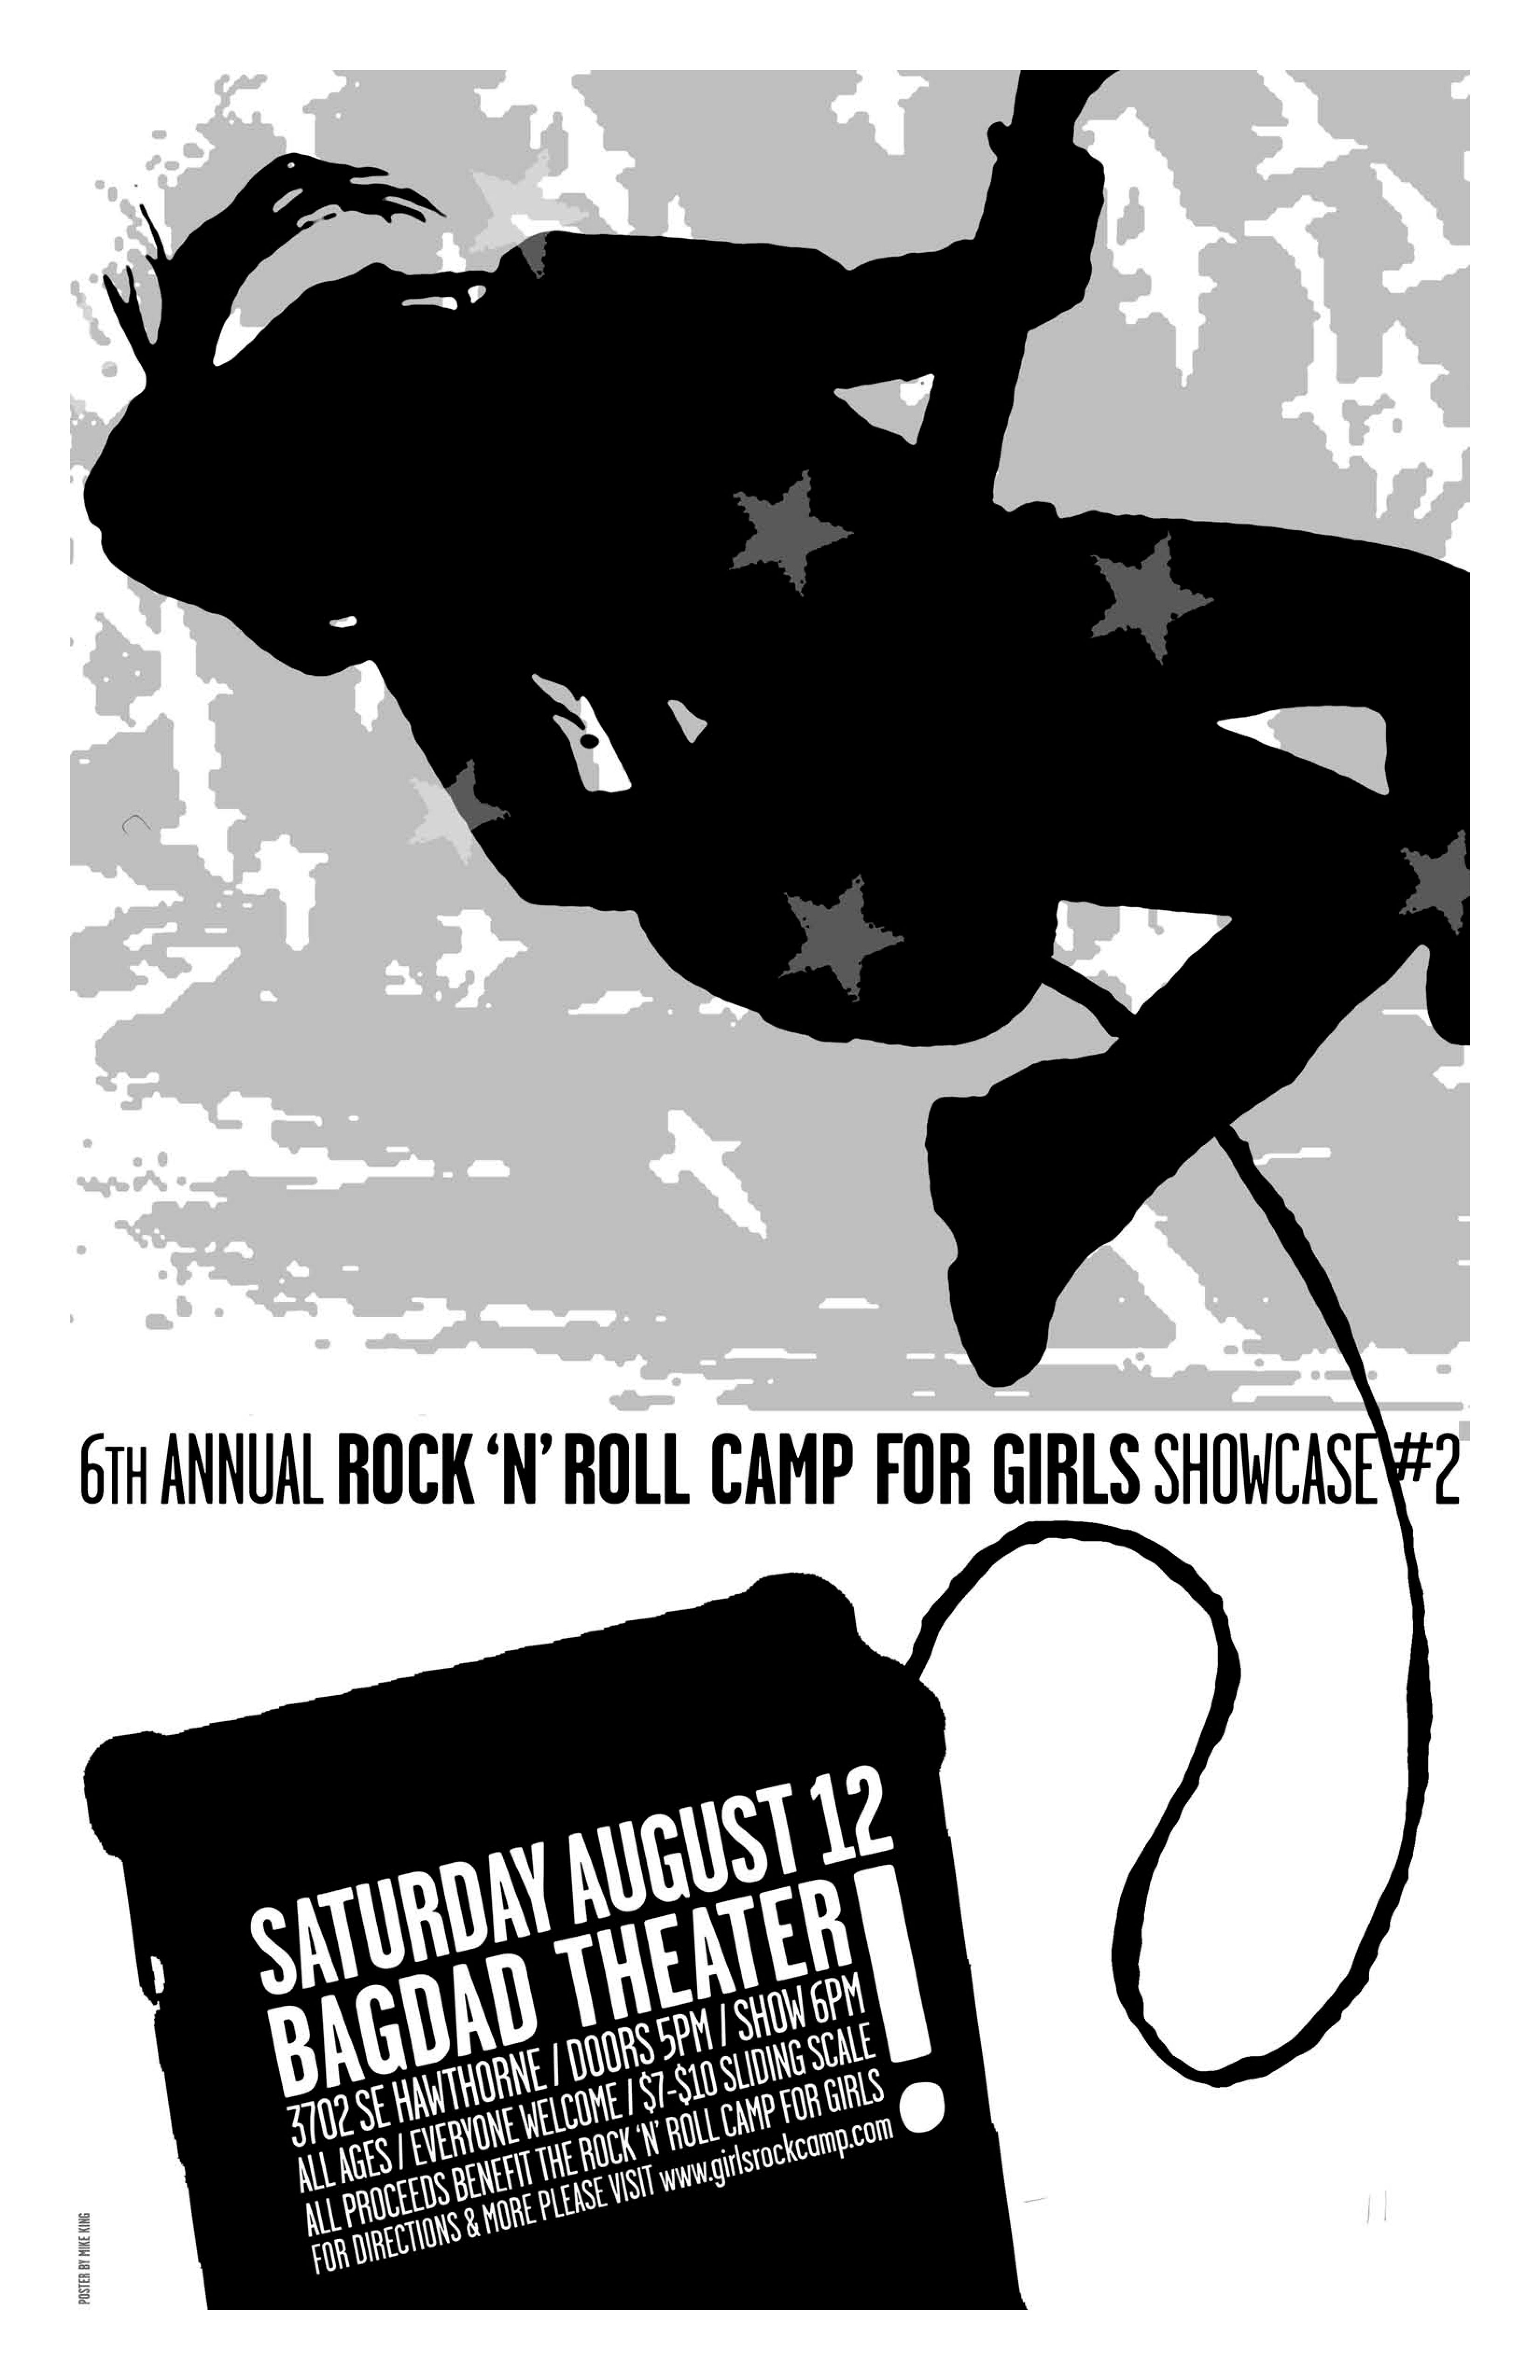 MXP-139.29 Rock N Roll Camp For Girls - Event 2006 Bagdad Theater  Aug 12 Concert Poster